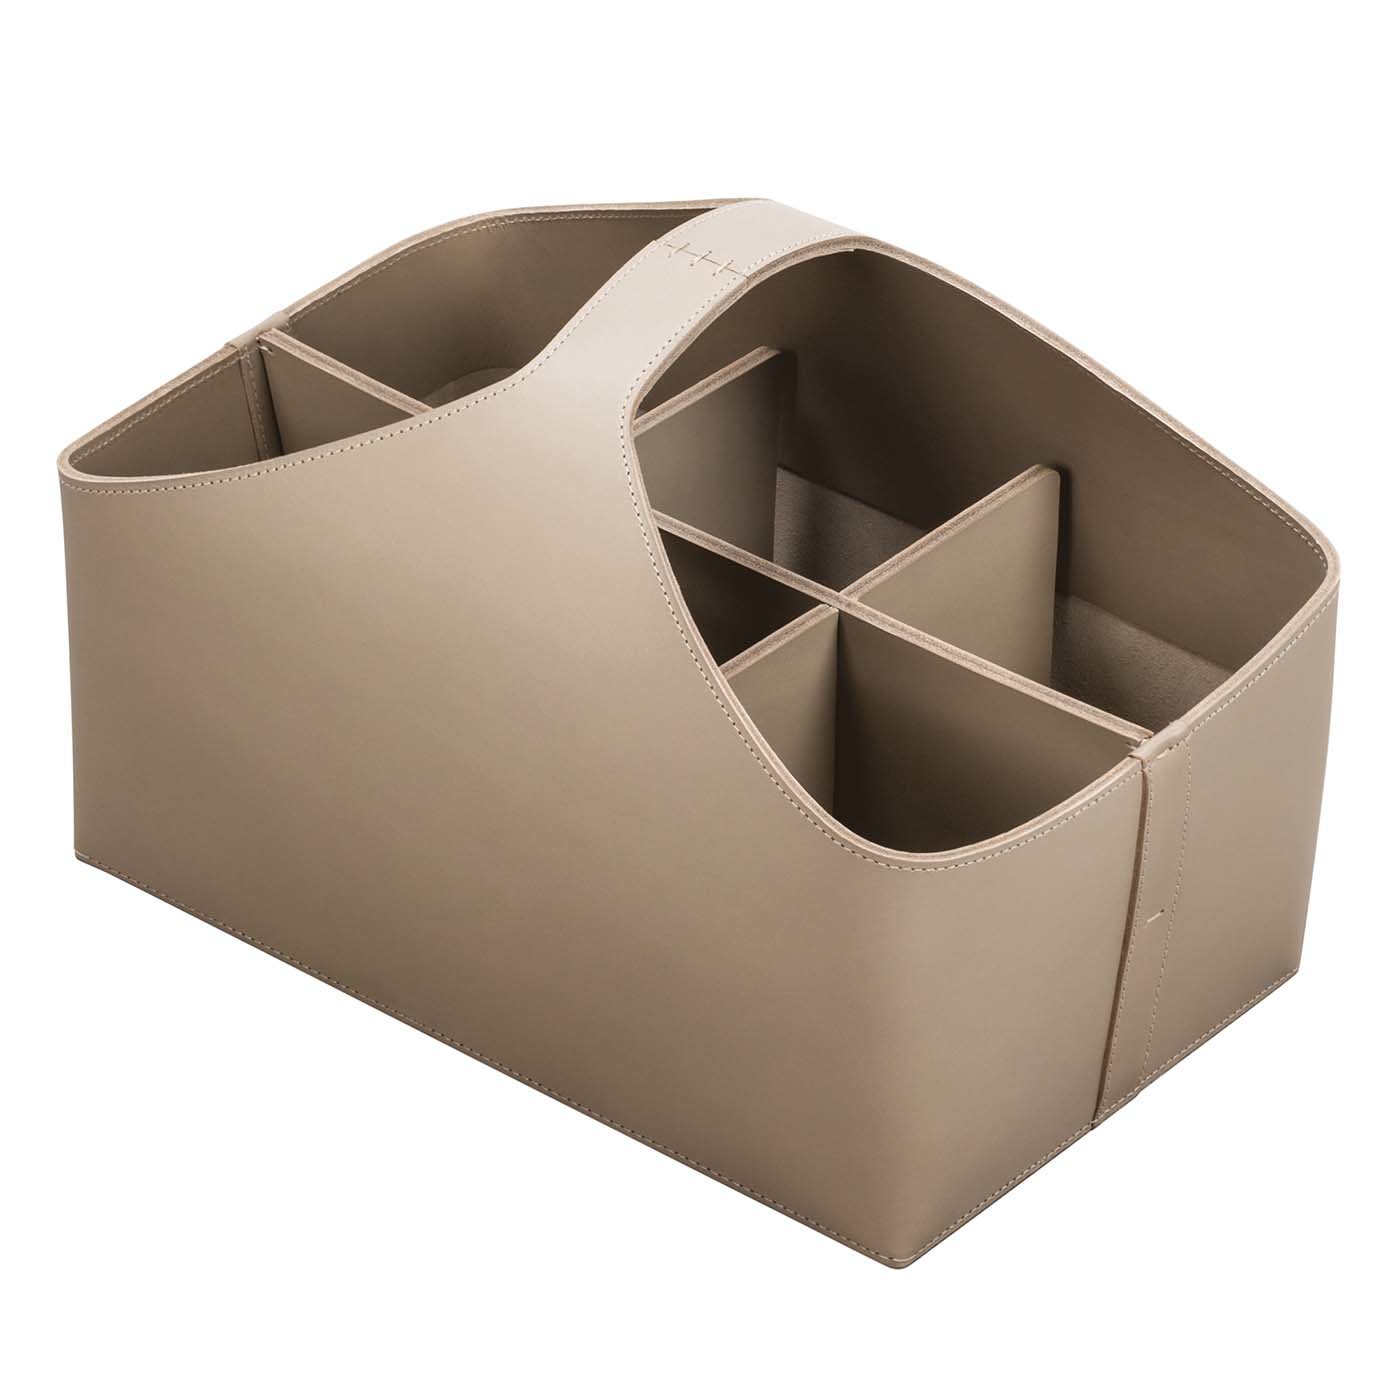 Arco Medium Caddy Basket with 6 Dividers in Sand Leather - Main view